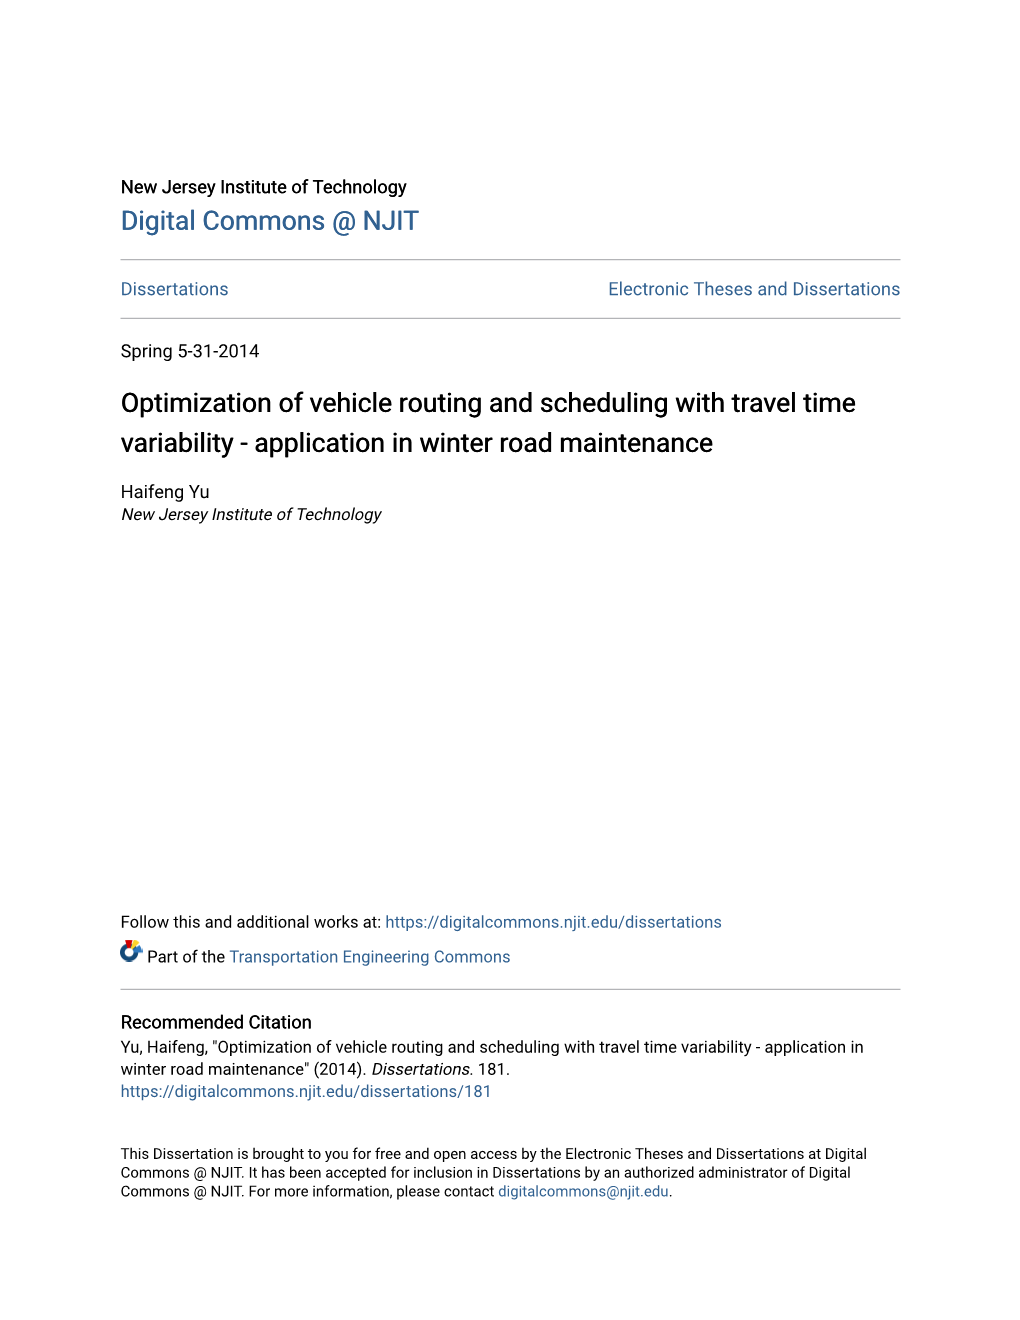 Optimization of Vehicle Routing and Scheduling with Travel Time Variability - Application in Winter Road Maintenance